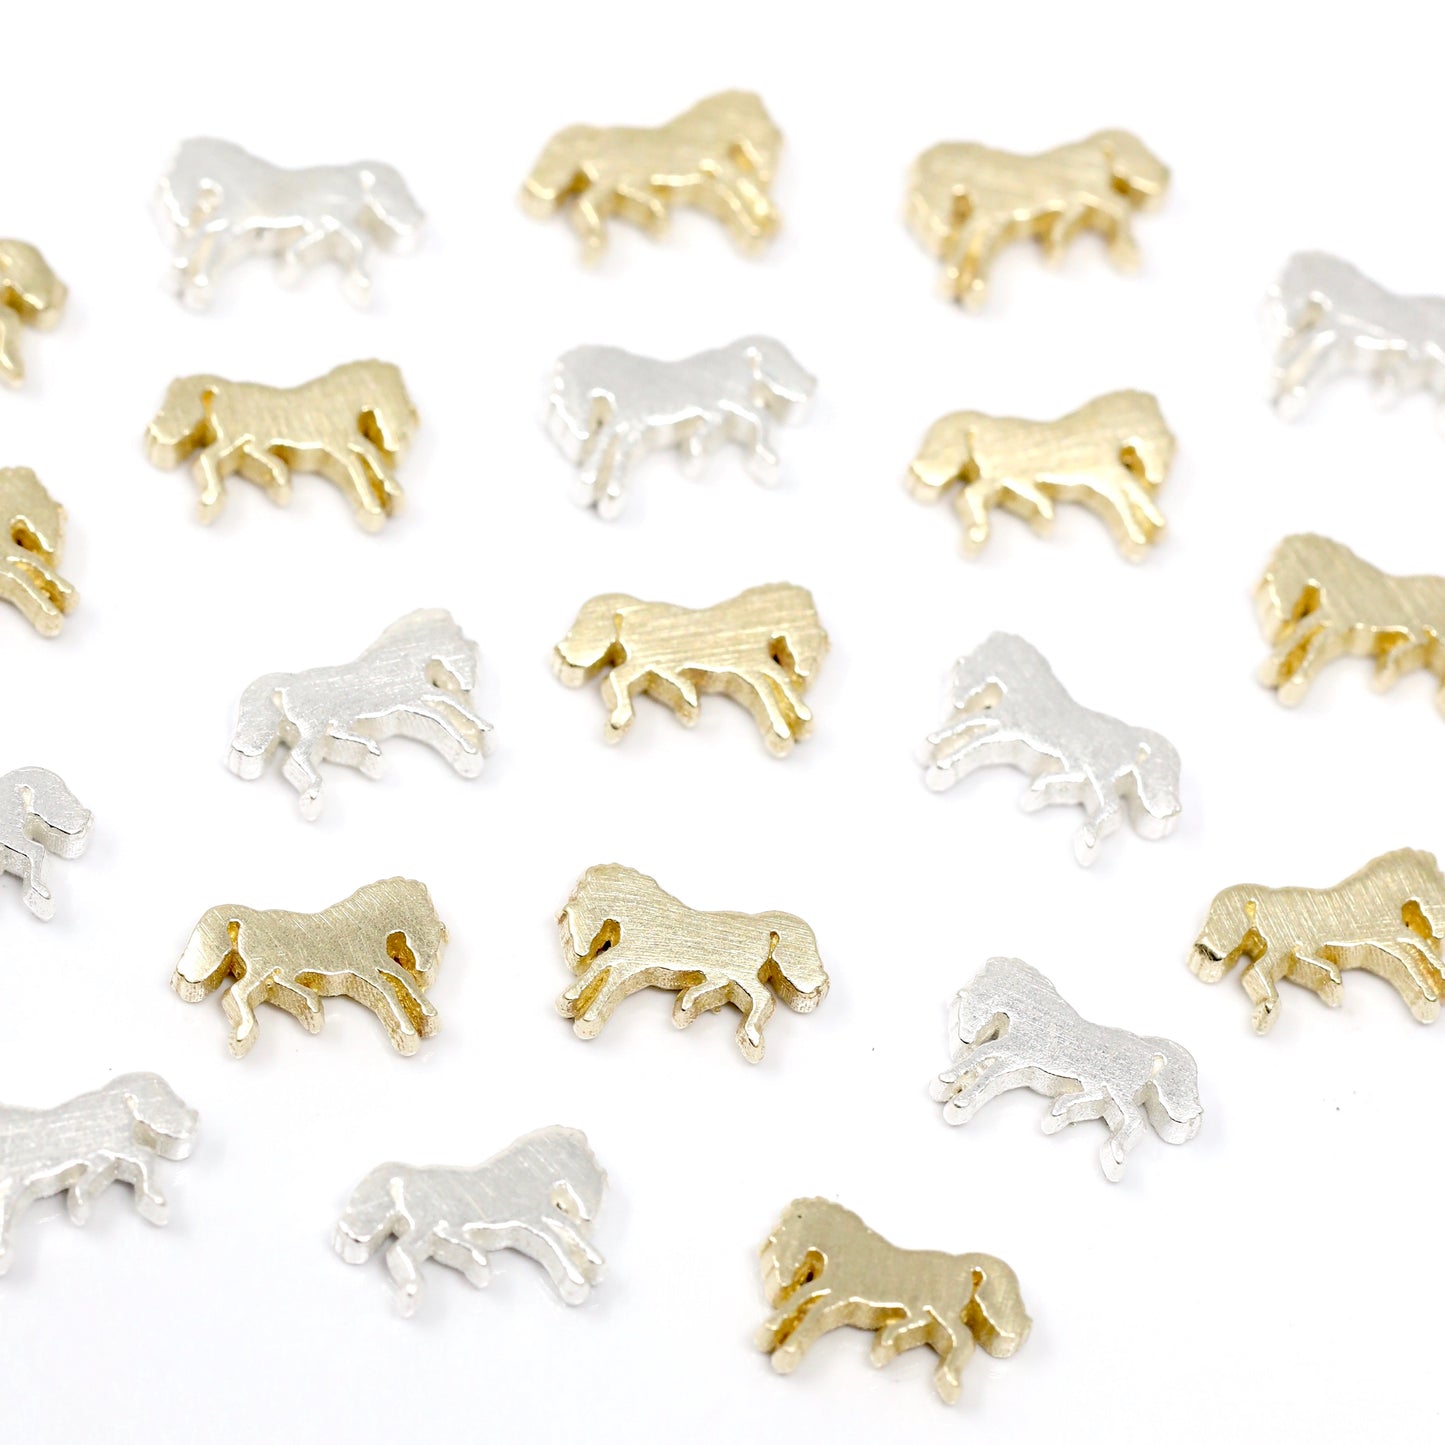 Bucking Horse Accent Charm Embellishments for Soldering or Jewelry Making